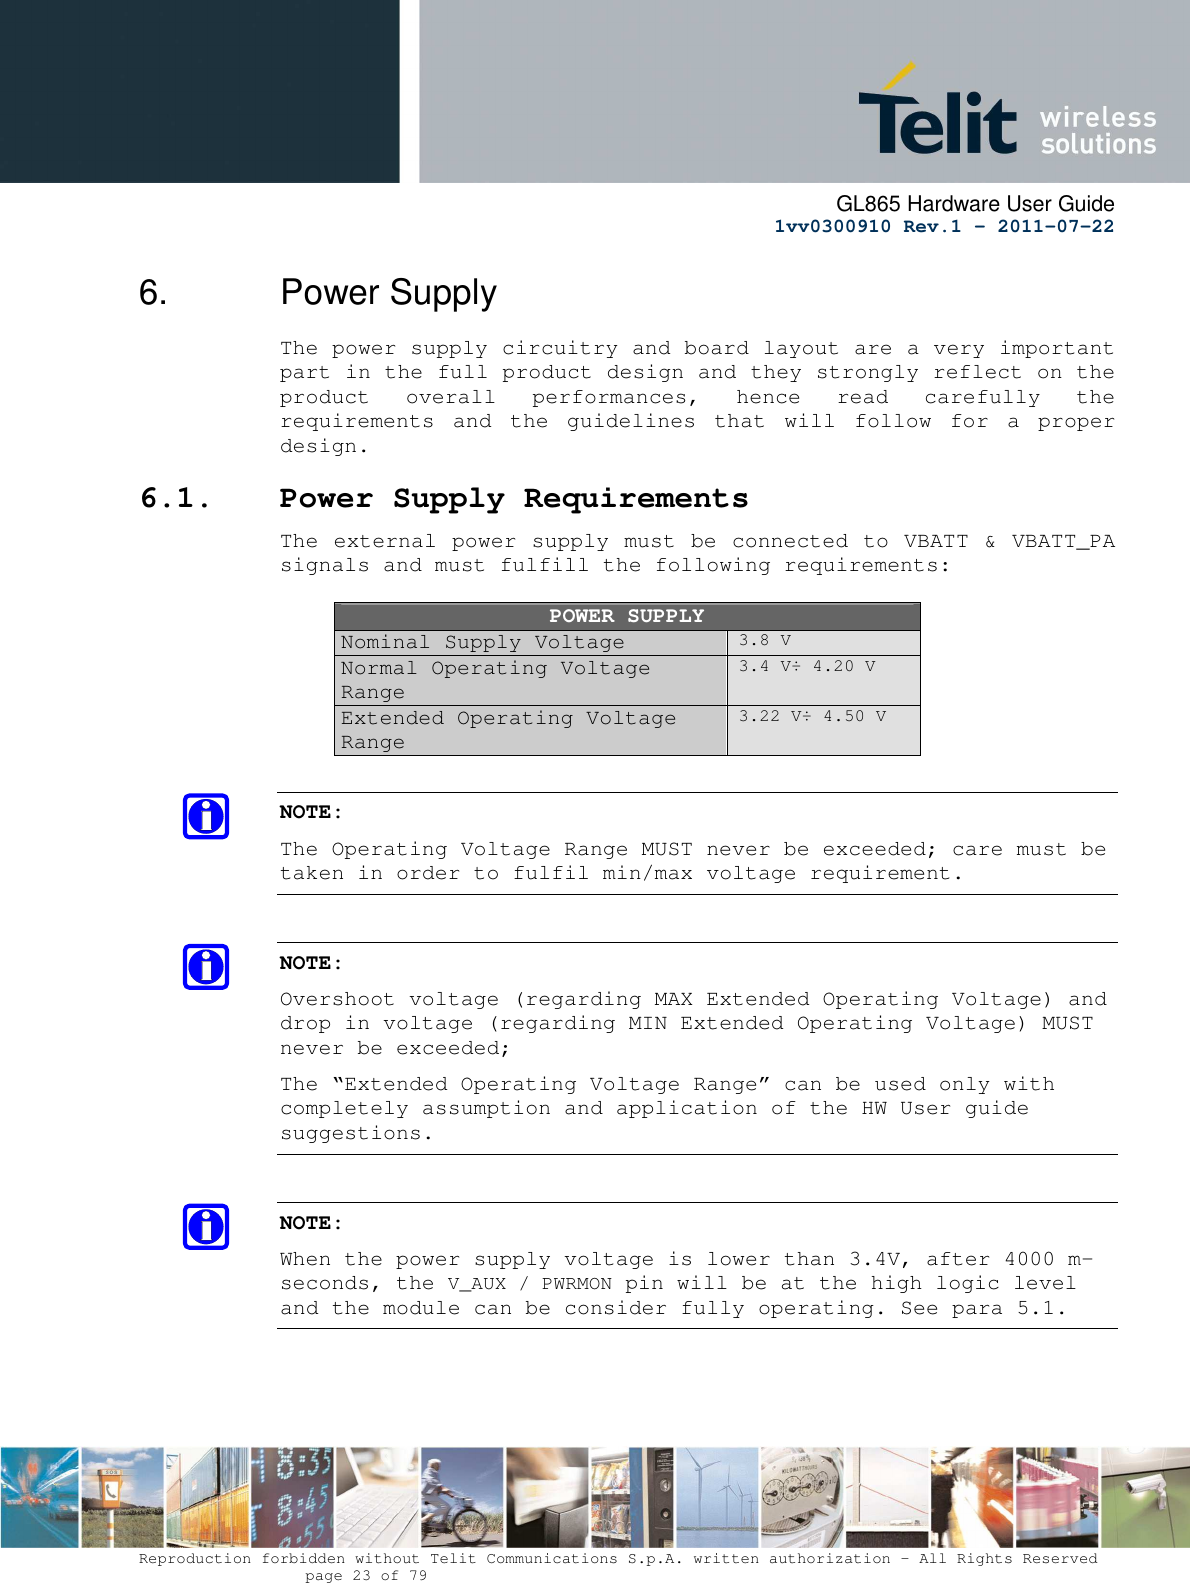      GL865 Hardware User Guide     1vv0300910 Rev.1 – 2011-07-22       Reproduction forbidden without Telit Communications S.p.A. written authorization - All Rights Reserved    page 23 of 79  6.  Power Supply The power supply circuitry and board layout are a very important part in the full product design and they strongly reflect on the product  overall  performances,  hence  read  carefully  the requirements  and  the  guidelines  that  will  follow  for  a  proper design. 6.1. Power Supply Requirements The external power supply must be connected to VBATT &amp; VBATT_PA signals and must fulfill the following requirements:  POWER SUPPLY Nominal Supply Voltage 3.8 V Normal Operating Voltage Range 3.4 V÷ 4.20 V Extended Operating Voltage Range 3.22 V÷ 4.50 V  NOTE: The Operating Voltage Range MUST never be exceeded; care must be taken in order to fulfil min/max voltage requirement.  NOTE: Overshoot voltage (regarding MAX Extended Operating Voltage) and drop in voltage (regarding MIN Extended Operating Voltage) MUST never be exceeded;  The “Extended Operating Voltage Range” can be used only with completely assumption and application of the HW User guide suggestions.   NOTE: When the power supply voltage is lower than 3.4V, after 4000 m-seconds, the V_AUX / PWRMON pin will be at the high logic level and the module can be consider fully operating. See para 5.1.     